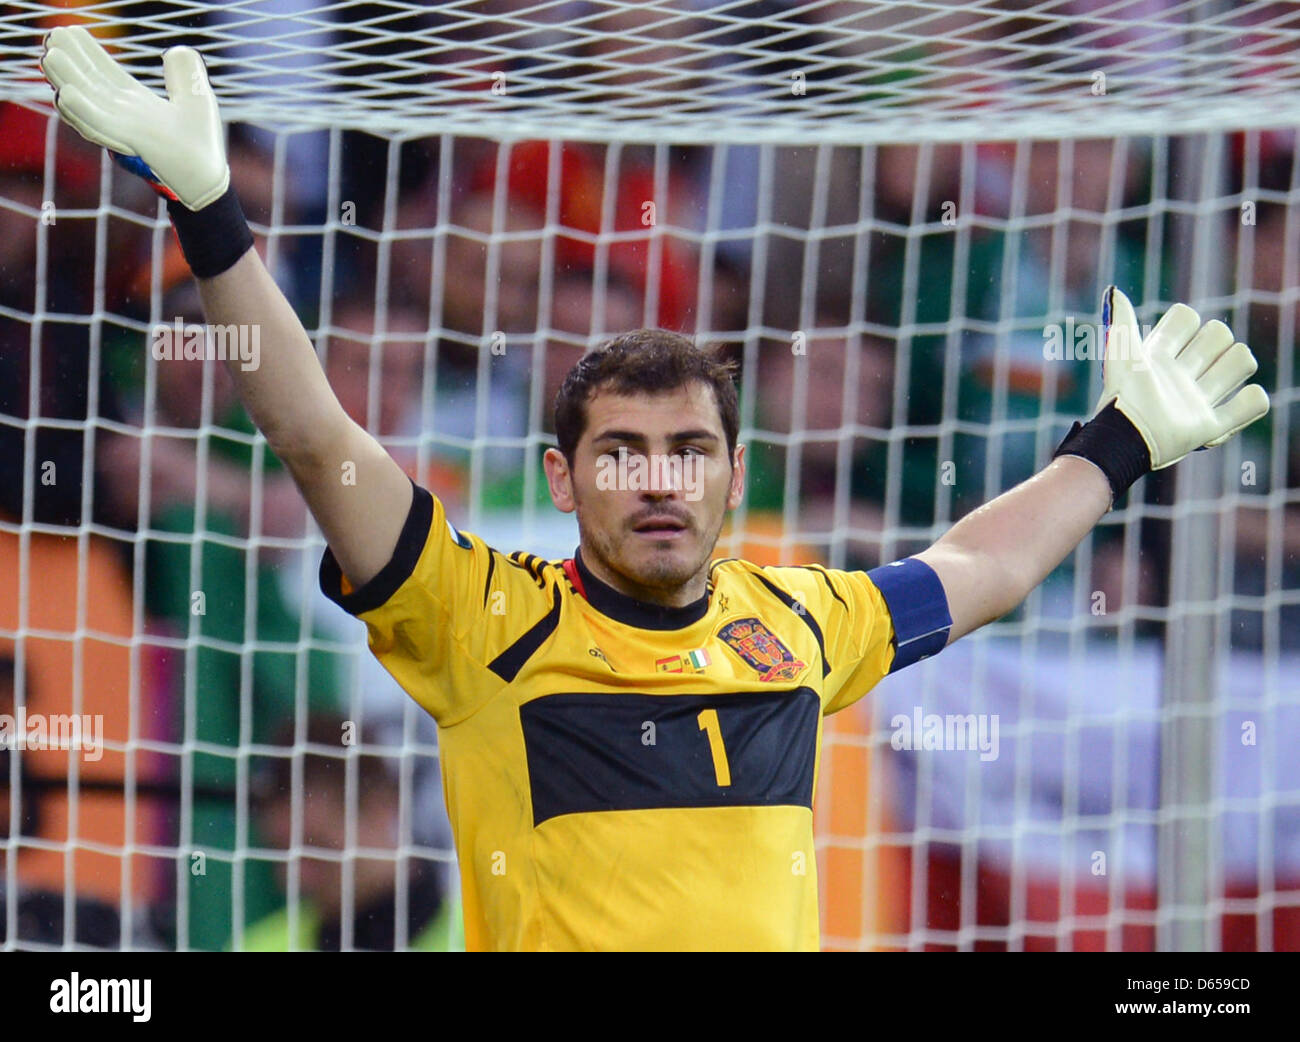 Spain's goalie Iker Casillas gestures during the UEFA EURO 2012 group C soccer match Spain vs Republic of Ireland at Arena Gdansk in Gdansk, Poland, 14 June 2012. Photo: Andreas Gebert dpa (Please refer to chapters 7 and 8 of http://dpaq.de/Ziovh for UEFA Euro 2012 Terms & Conditions)  +++(c) dpa - Bildfunk+++ Stock Photo